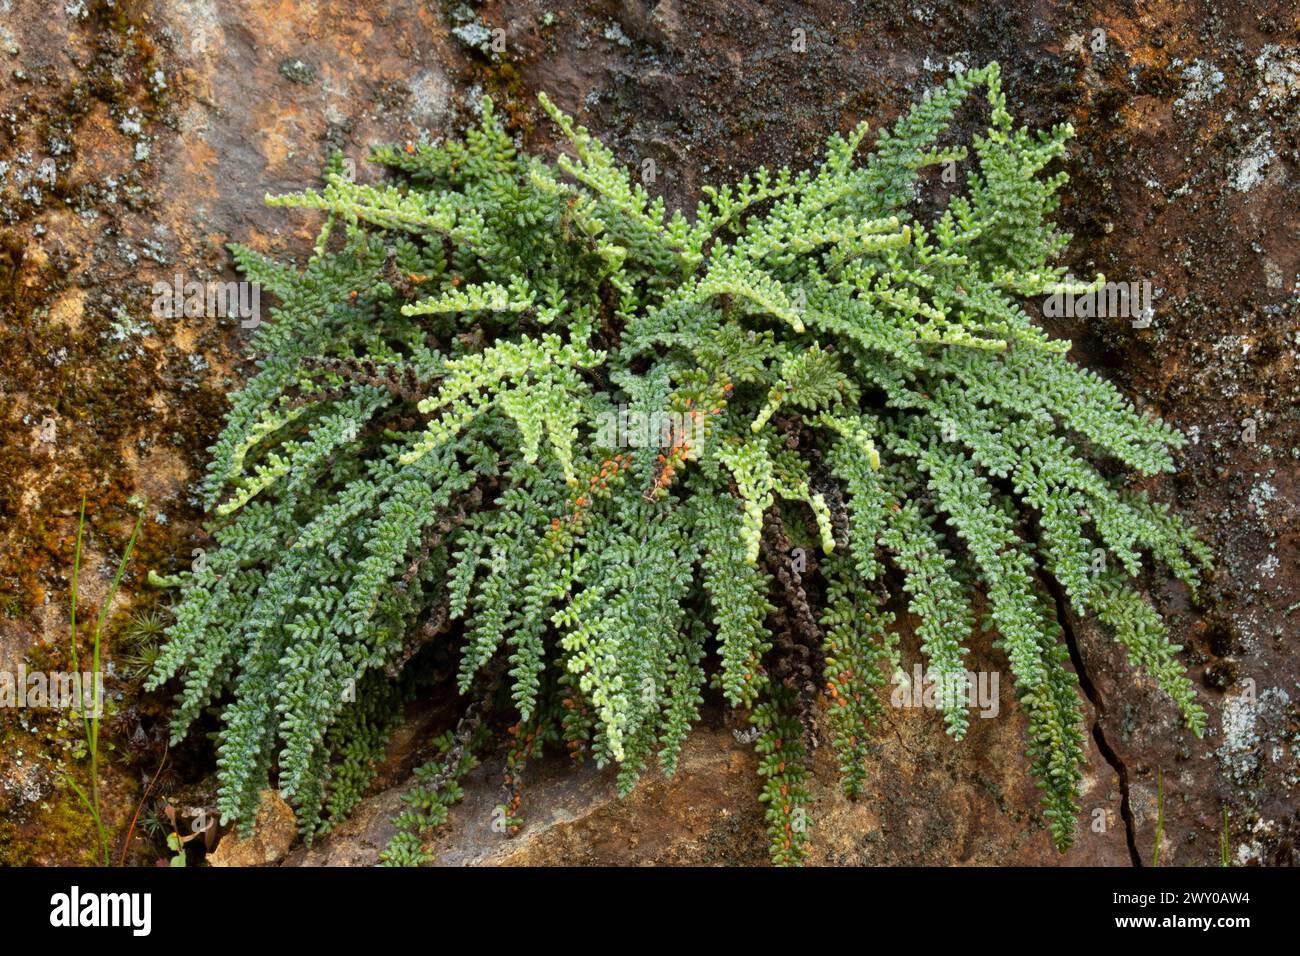 Lace lip fern (Myriopteris gracillima), Rogue Wild and Scenic River, Grave Creek to Marial National Back Country Byway, Oregon Stock Photo